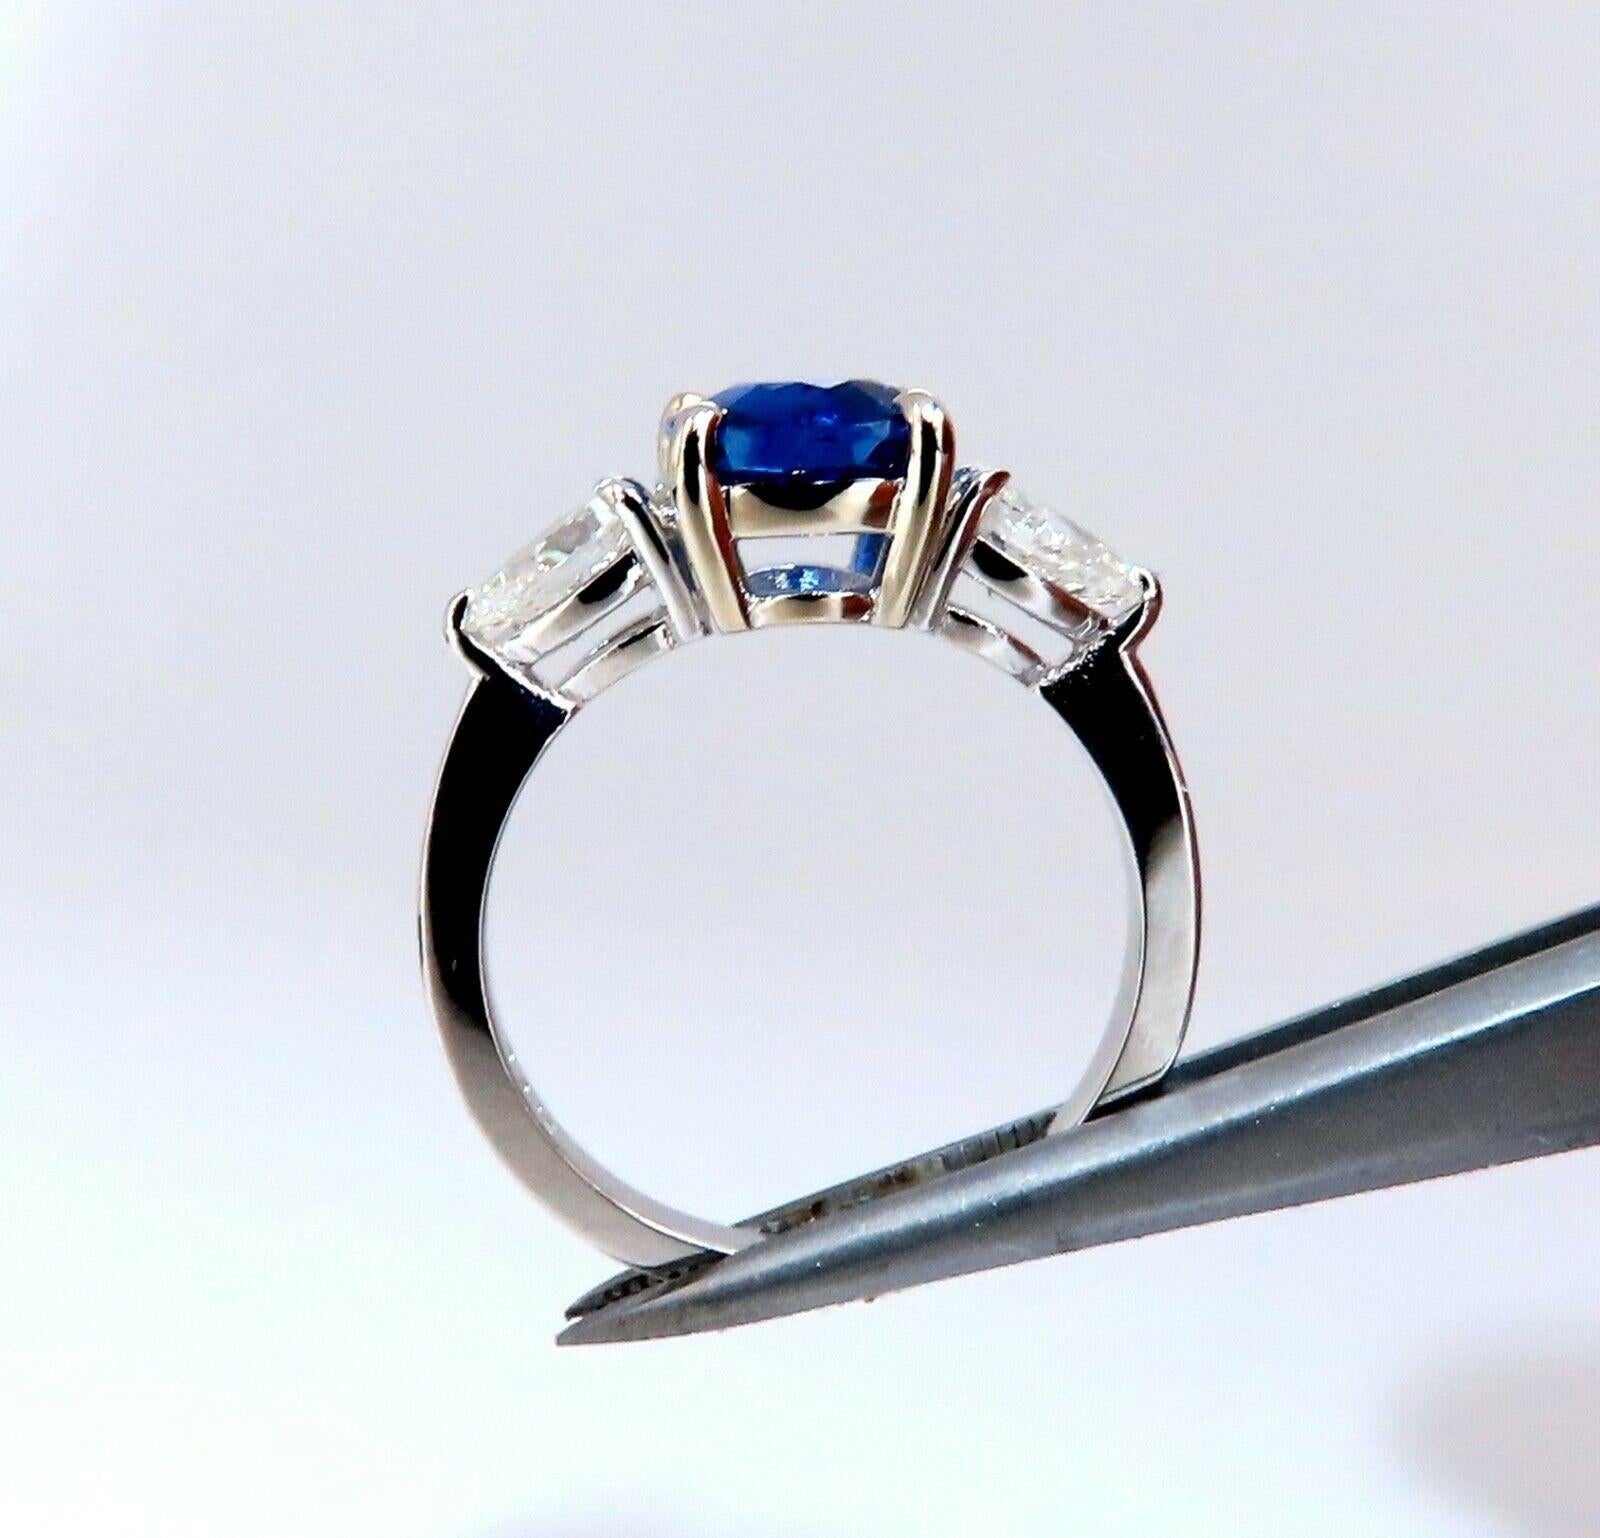 Oval Cut GIA Certified 2.94ct Natural No Heat Blue Sapphire Diamonds Ring 14kt